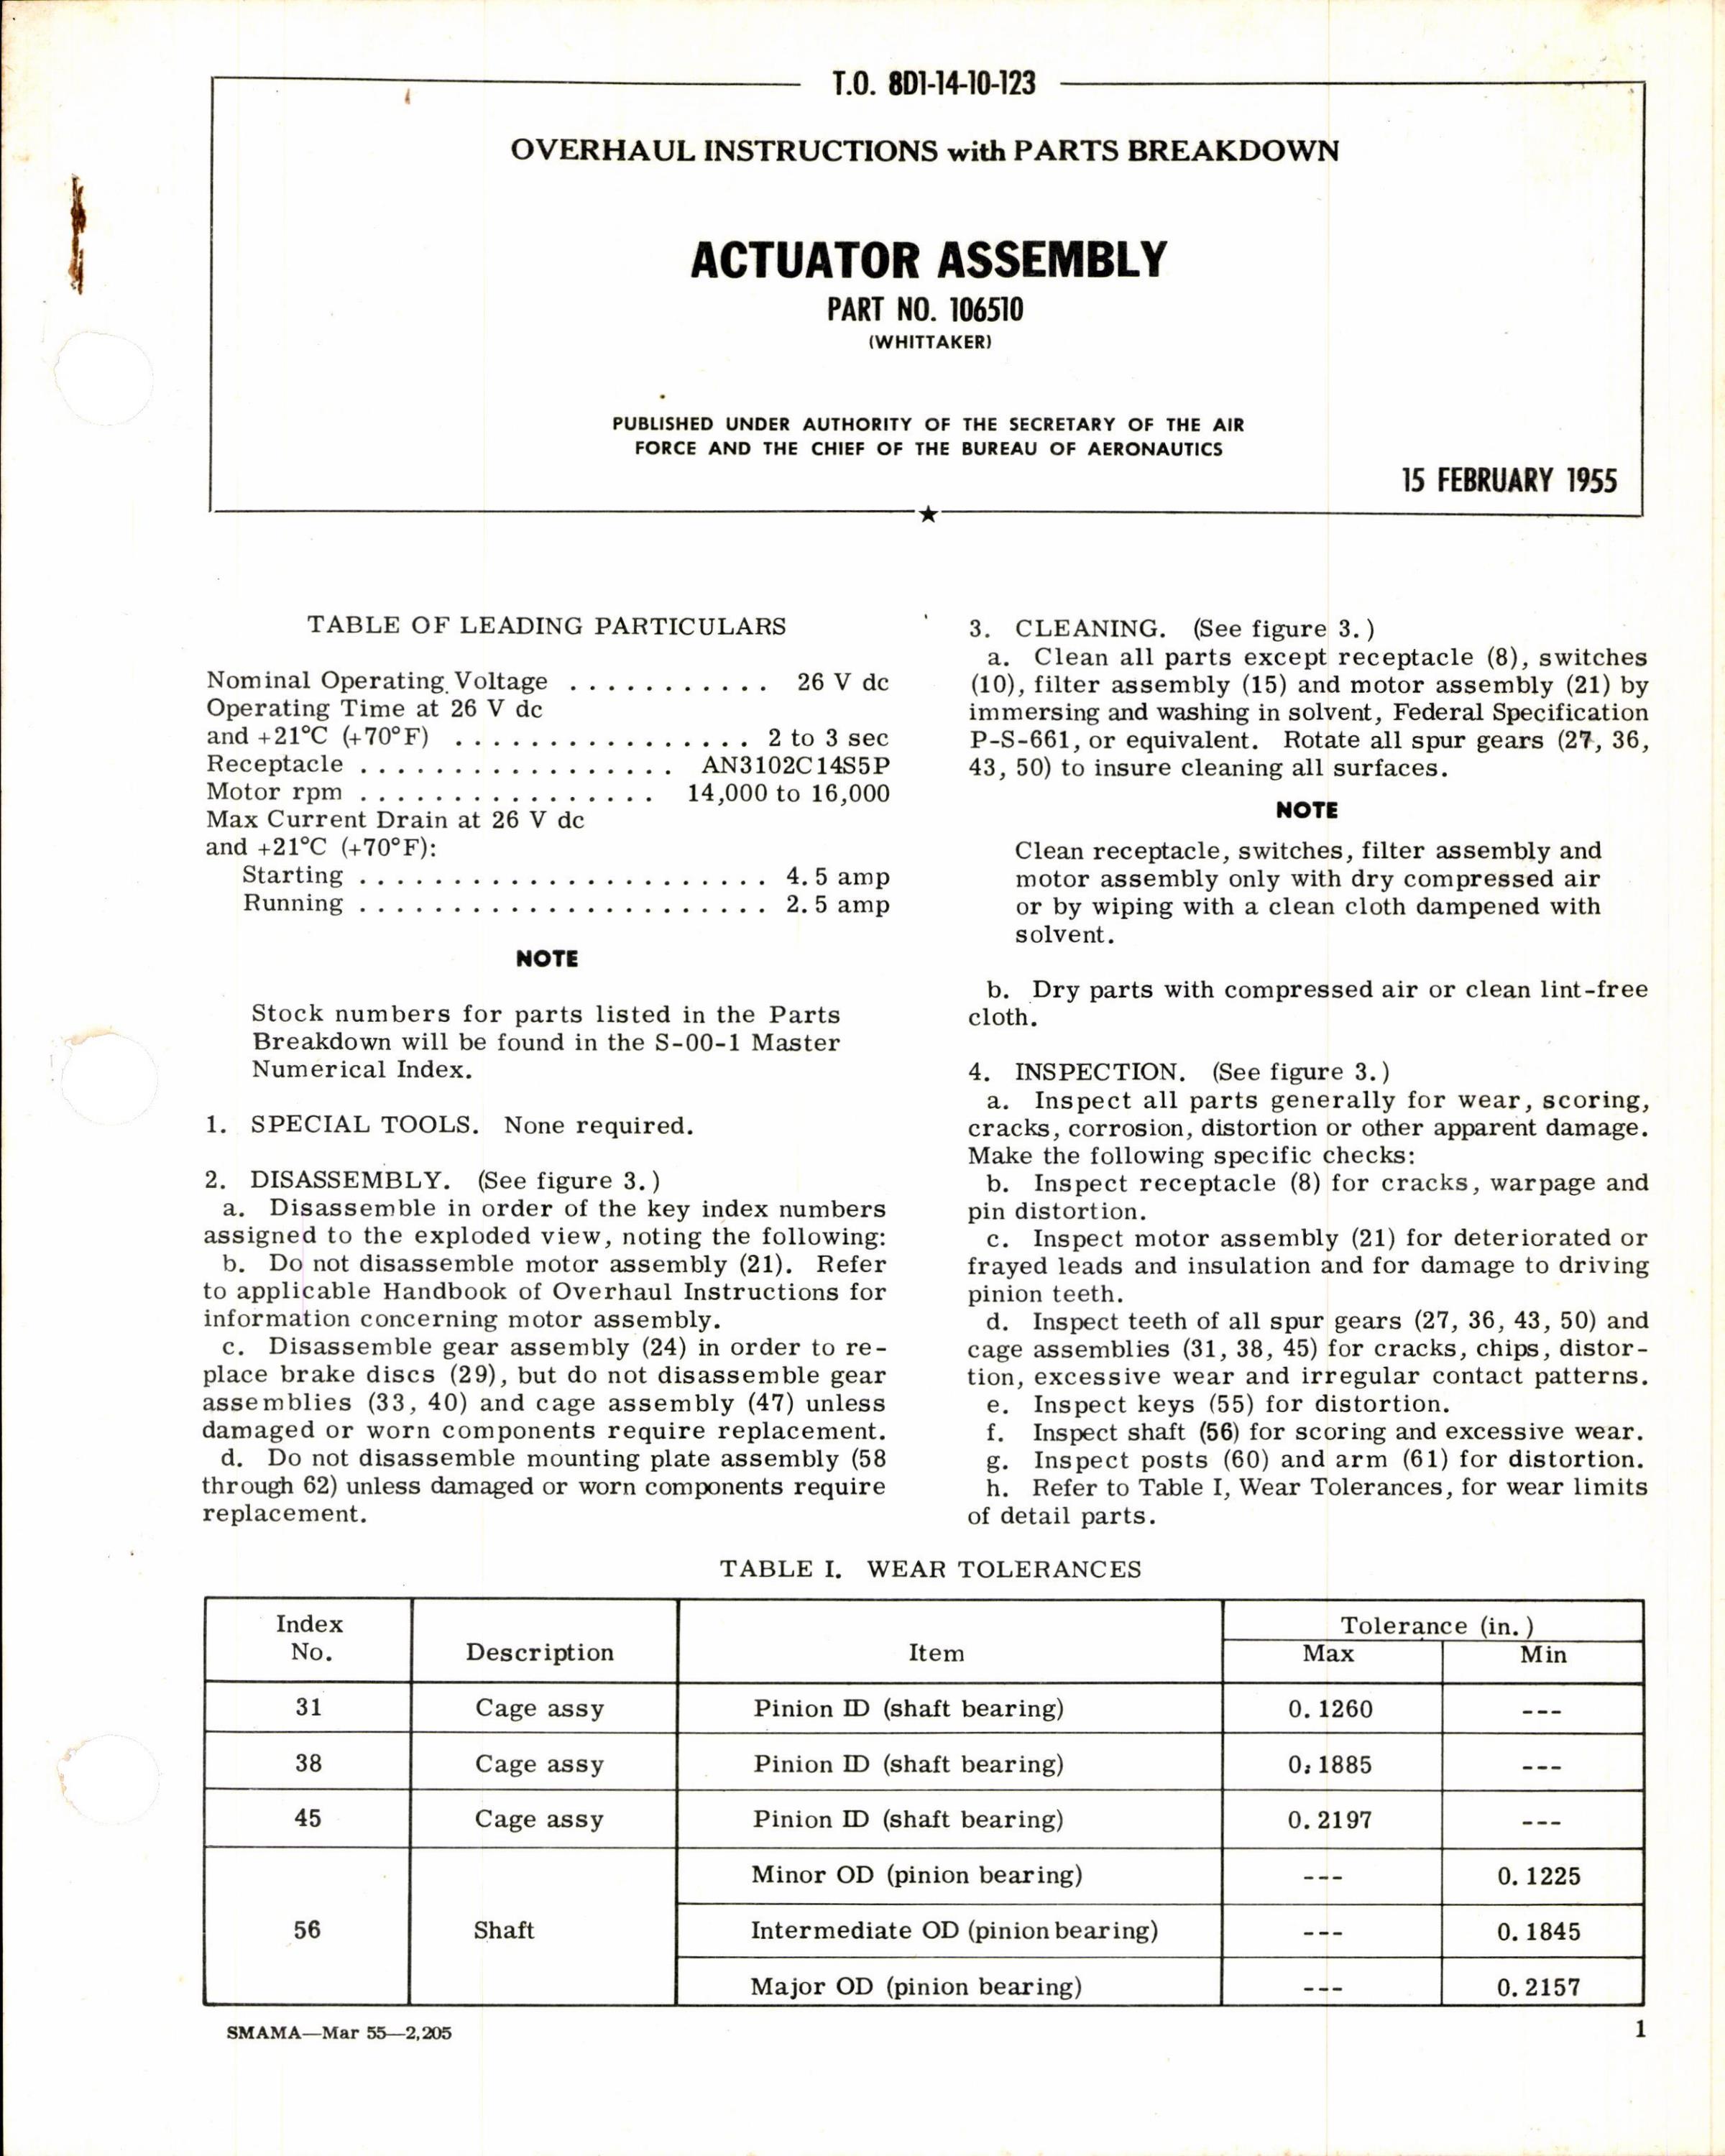 Sample page 1 from AirCorps Library document: Instructions w Parts Breakdown for Actuator Assembly Part 106510